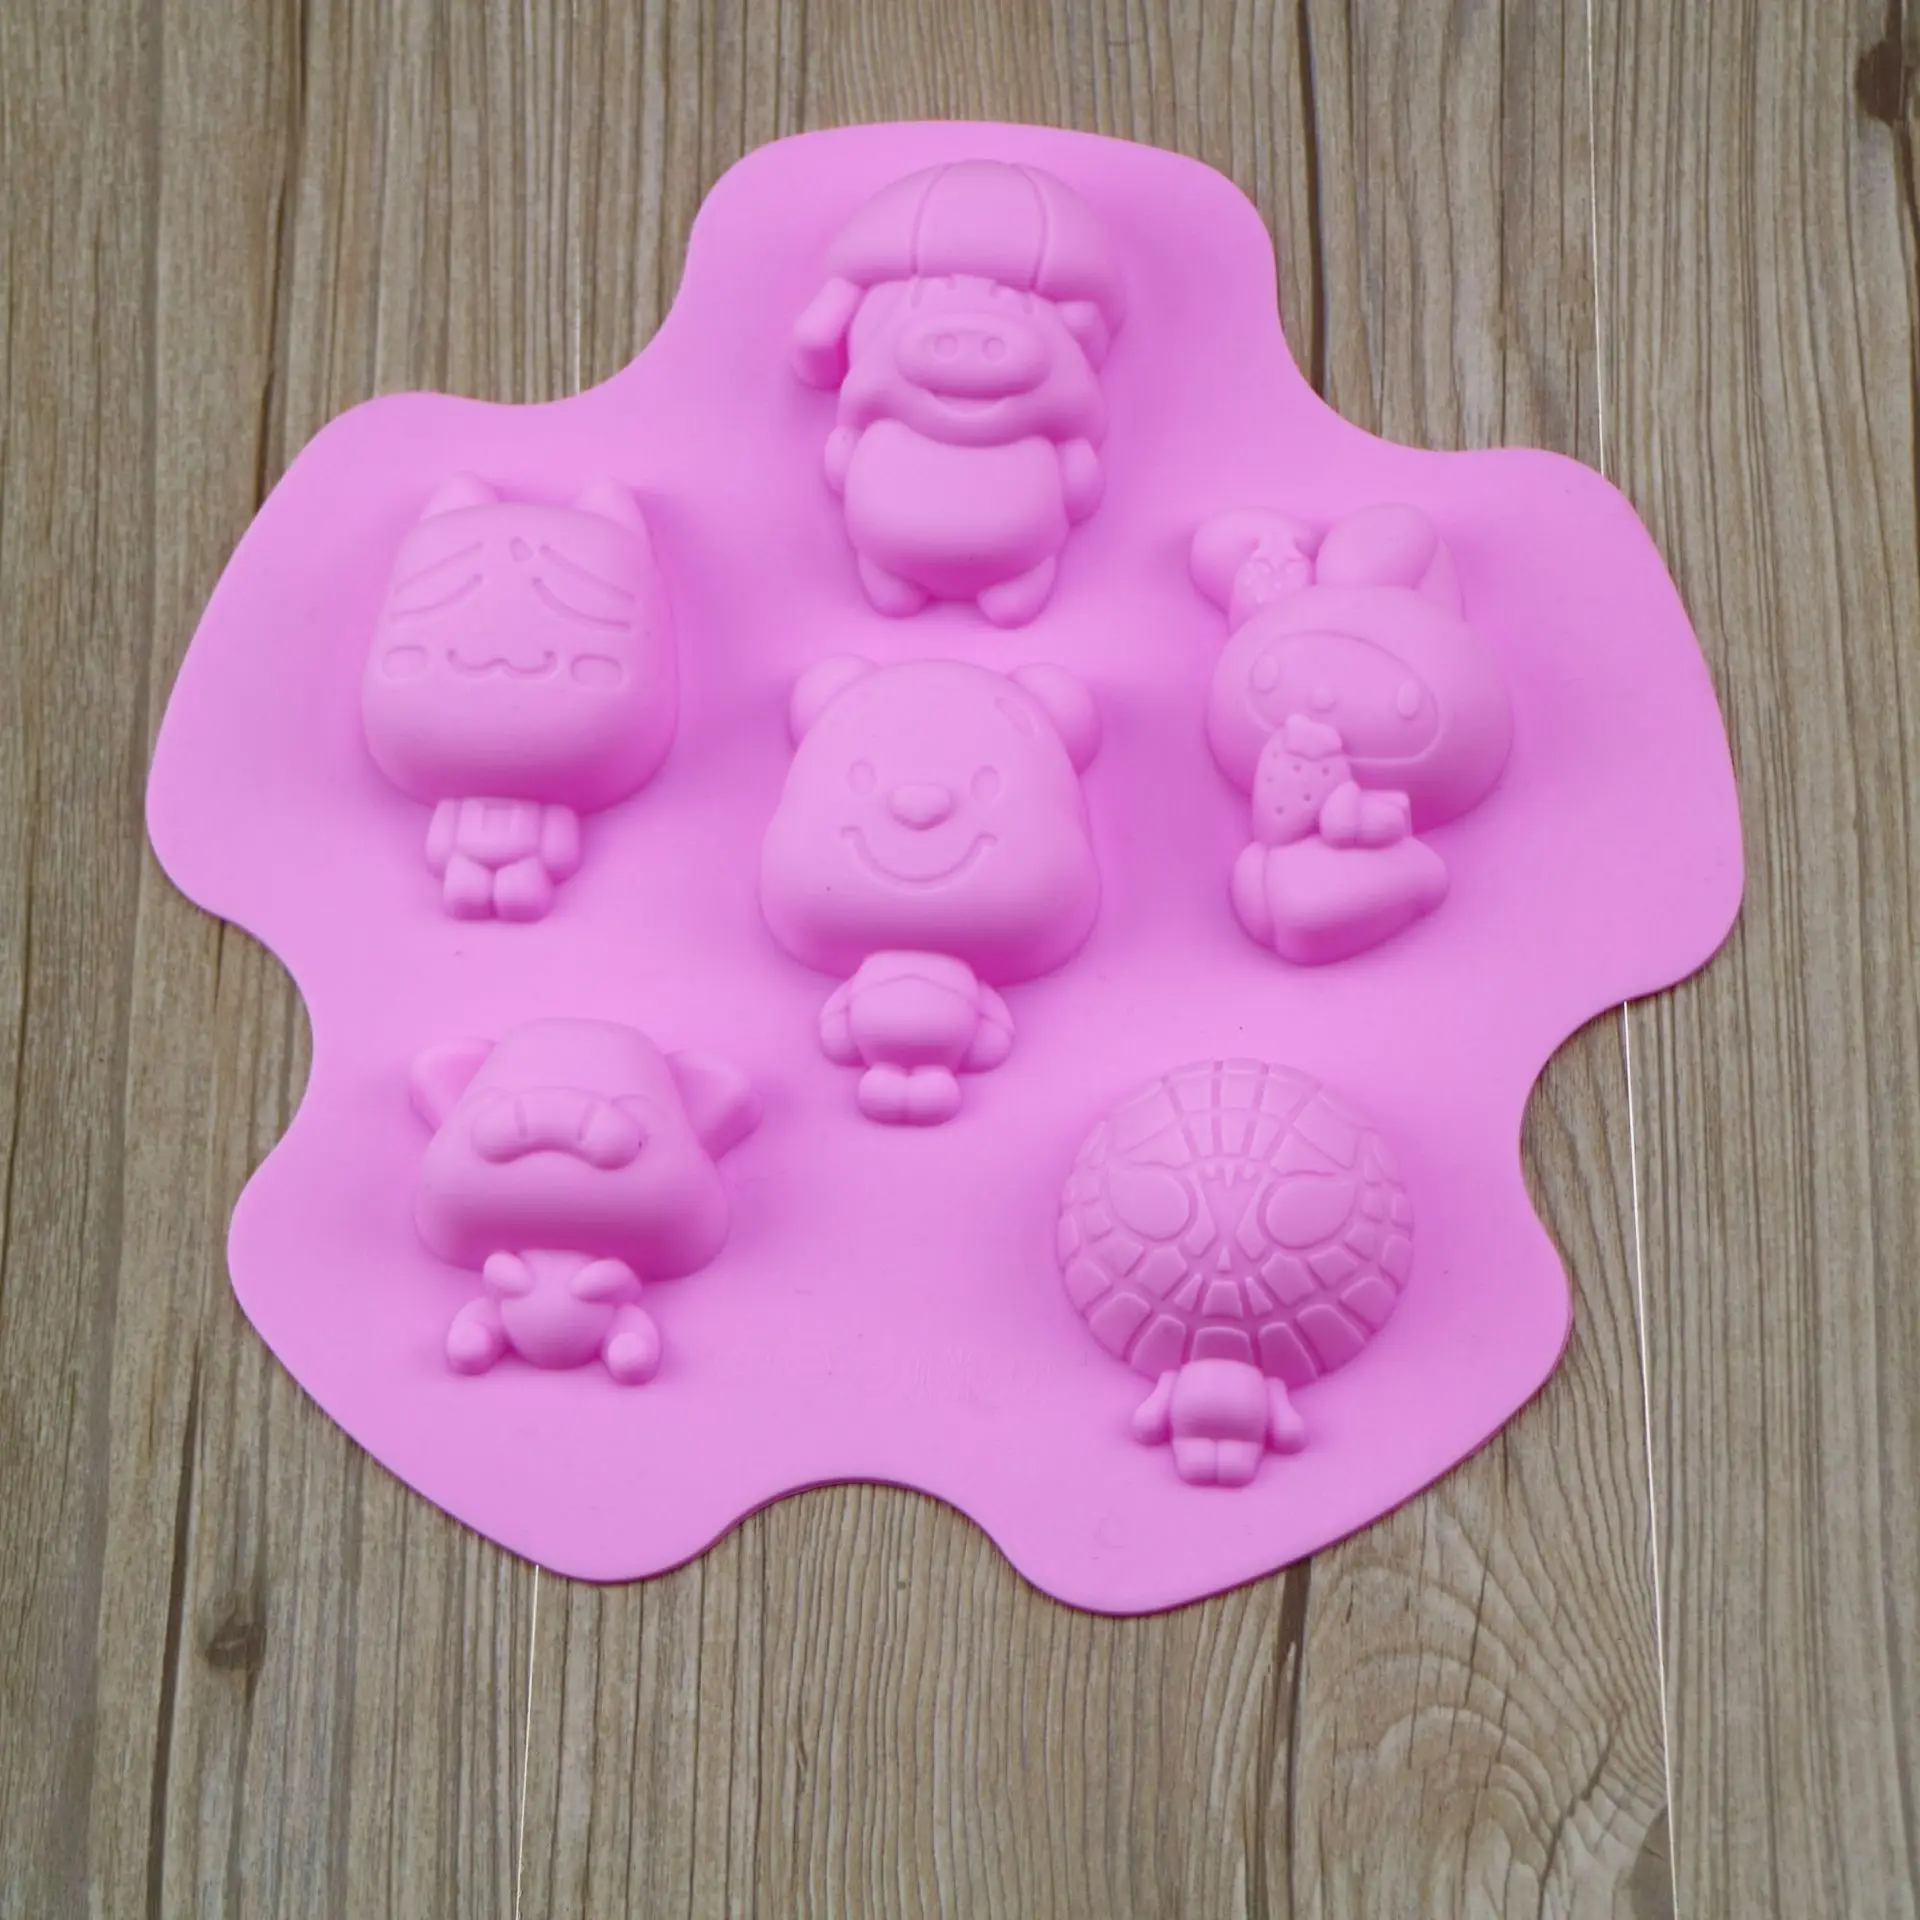 Silicone 6 Cartoon Cake Mold 6 Different Characters Pig Spider Bear Fragrance Mold Plaster Mold